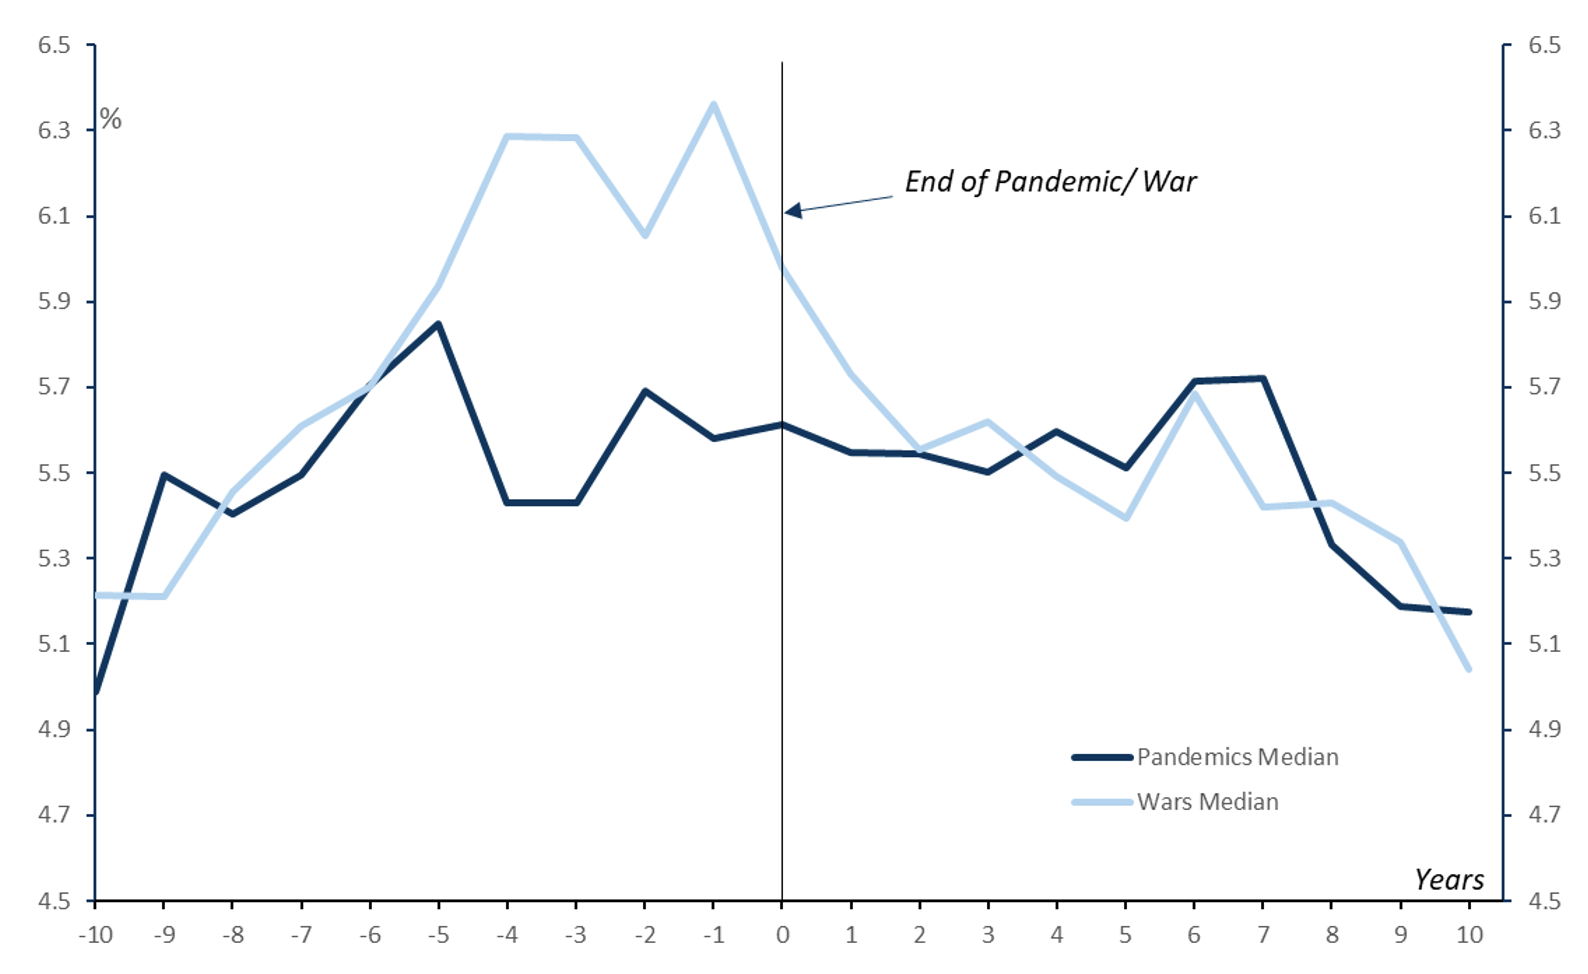 Figure 4. Bond Yields Rise Much More During Wars than Pandemics